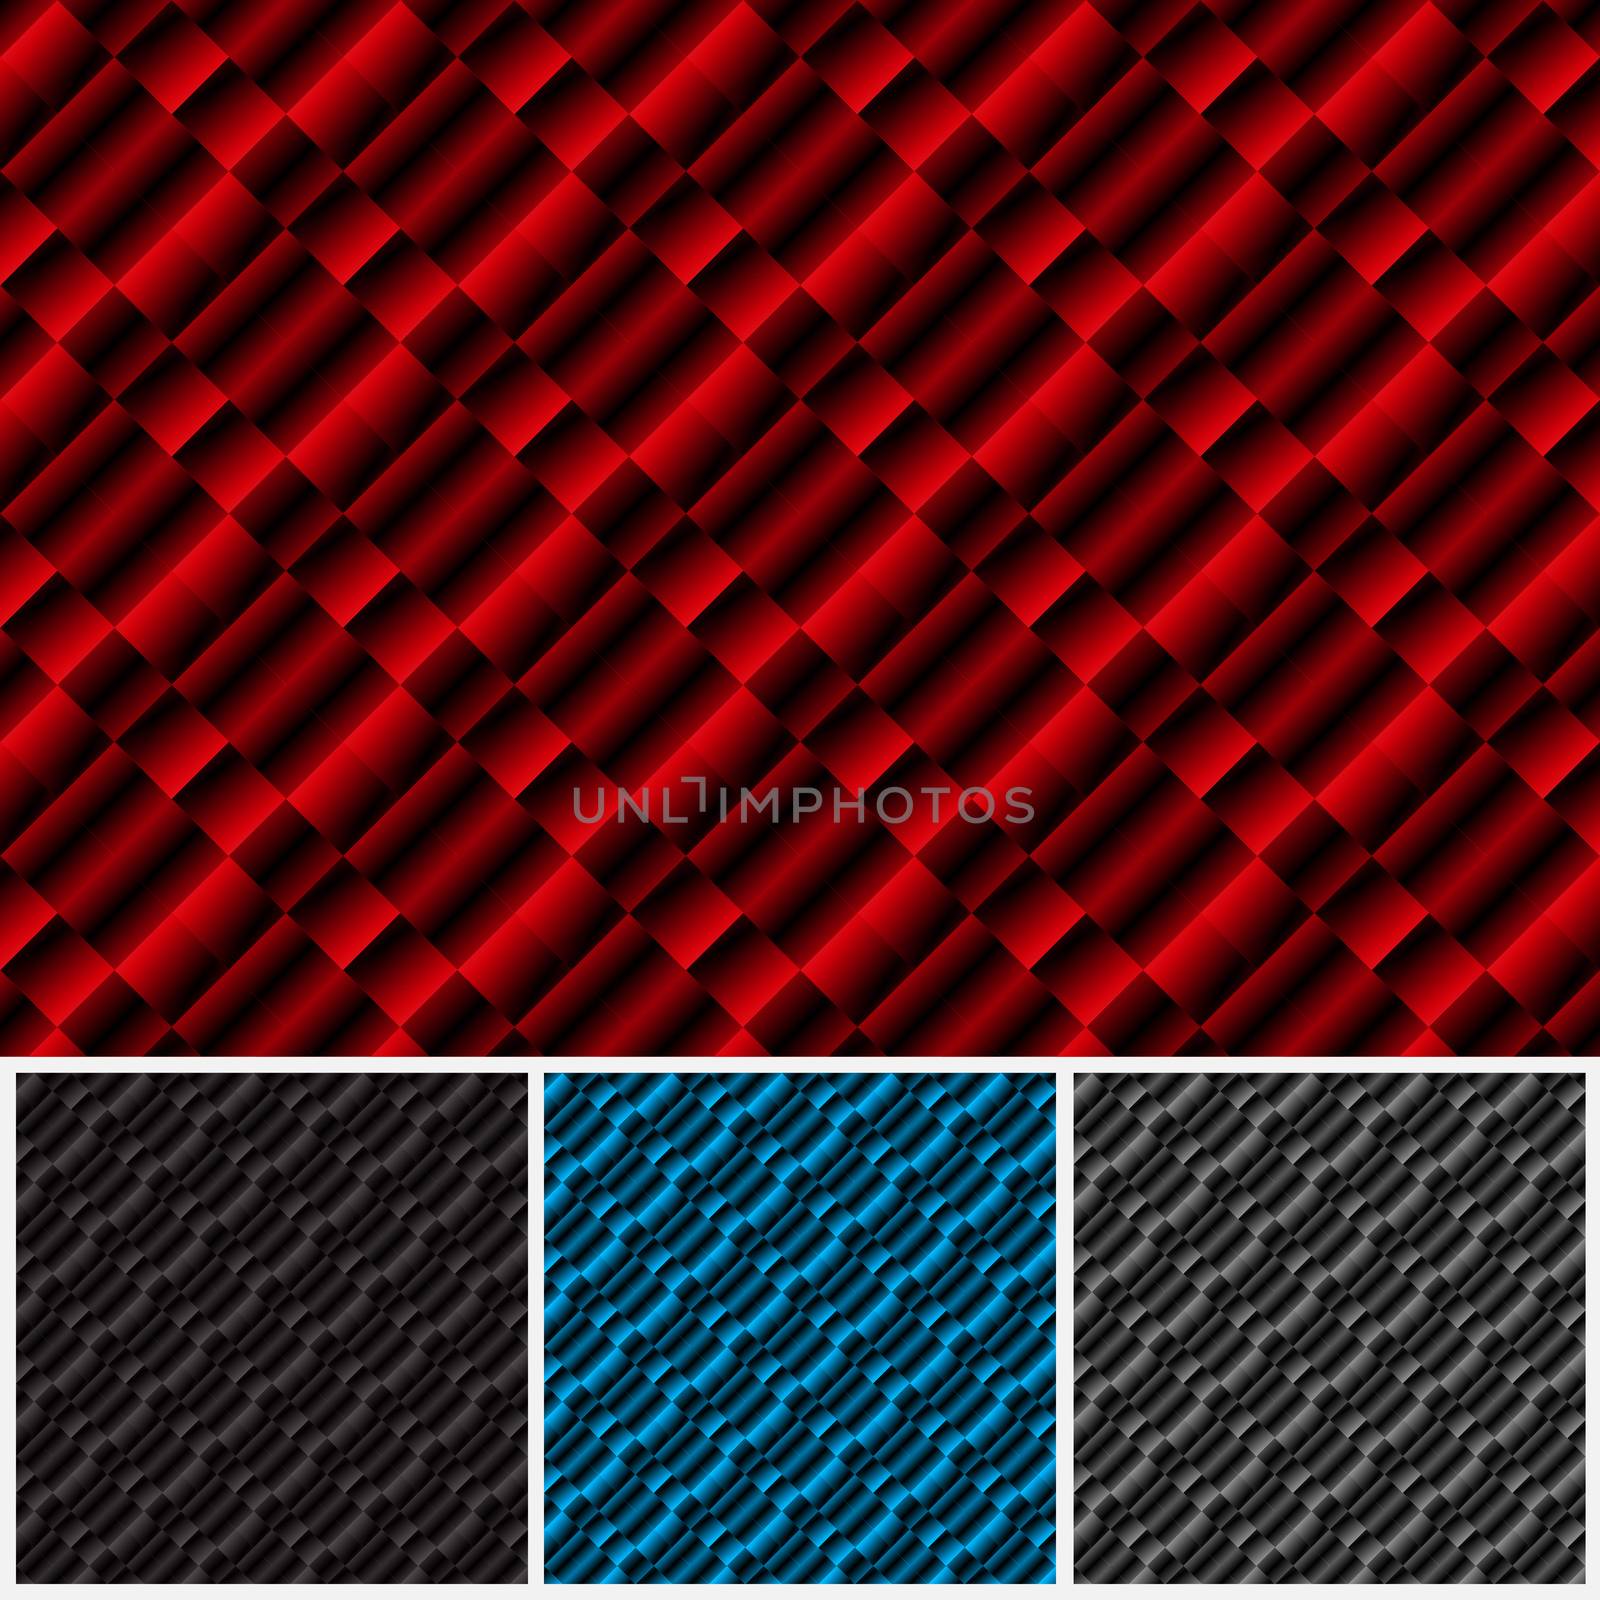 Set of patterns of different colors. Abstract checkered background. Geometric pattern. Vector illustration.